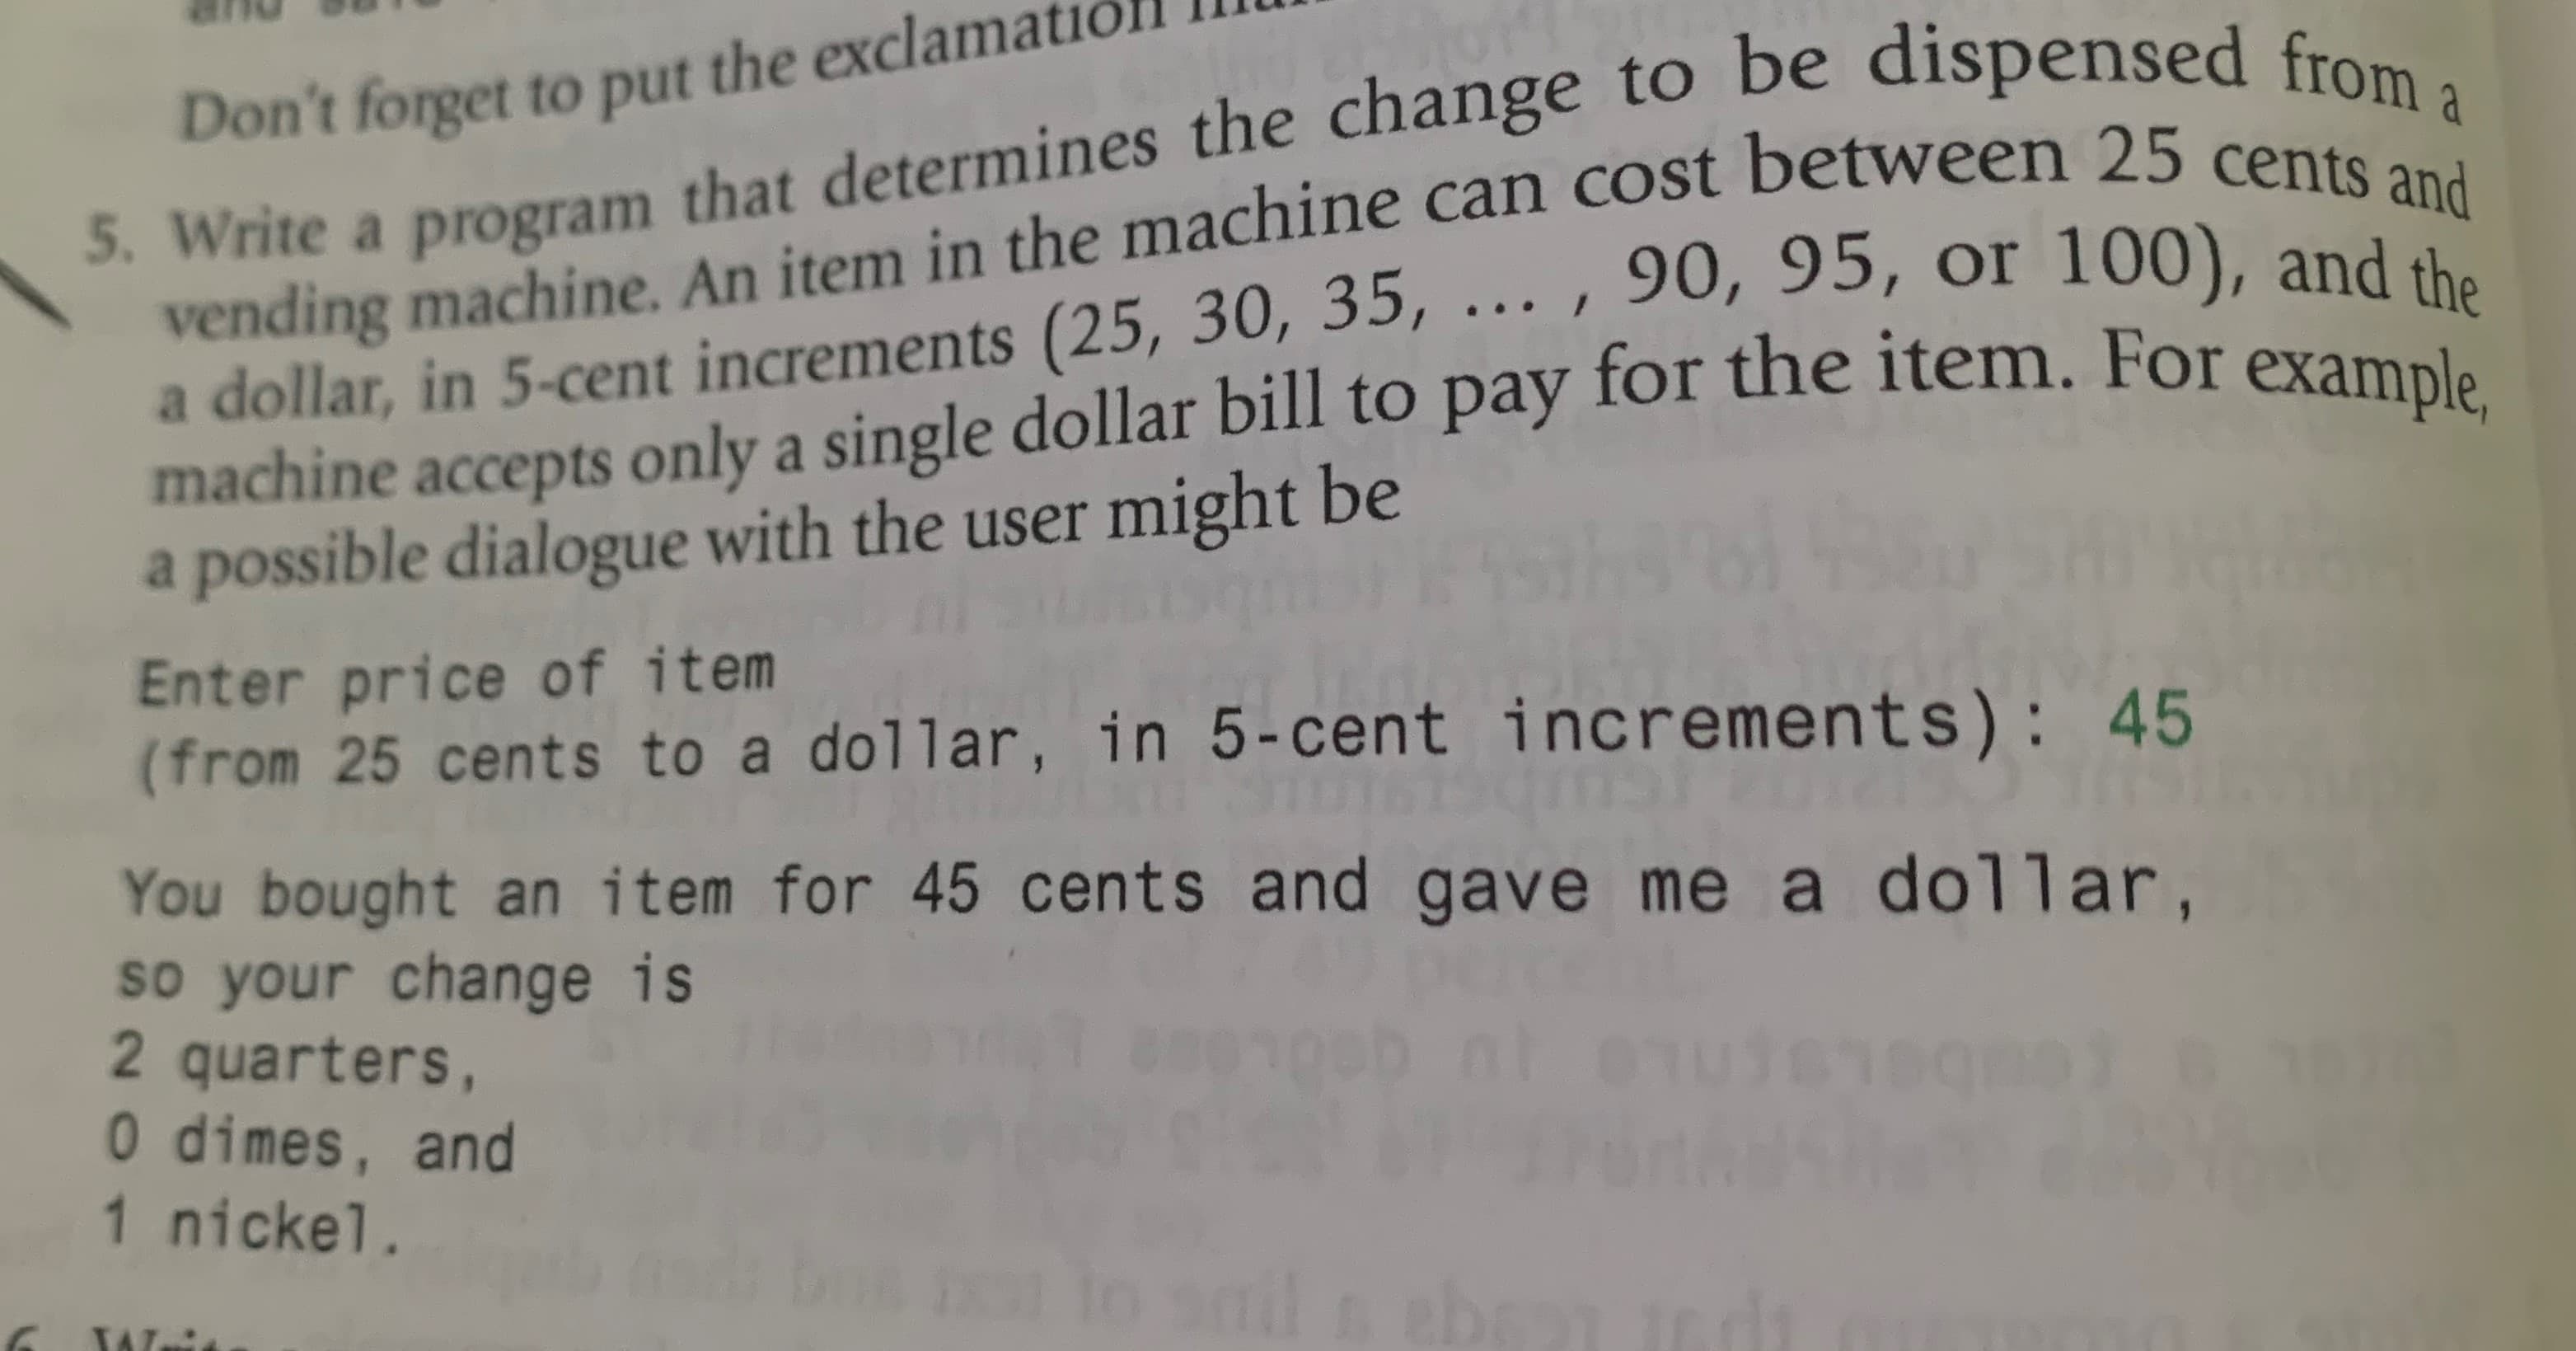 5. Write a program that determines the change to be dispensed from a
vending machine. An item in the machine can cost between 25 cents and
a dollar, in 5-cent increments (25, 30, 35, ... , 90, 95, or 100), and the
machine accepts only a single dollar bill to pay for the item. For example,
a possible dialogue with the user might be
Don't forget to put the exclan
a
Enter price of item
(from 25 cents to a dollar, in 5-cent increments): 45
You bought an item for 45 cents and gave me a dollar,
so your change is
2 quarters,
0 dimes, and
1 nickel.
